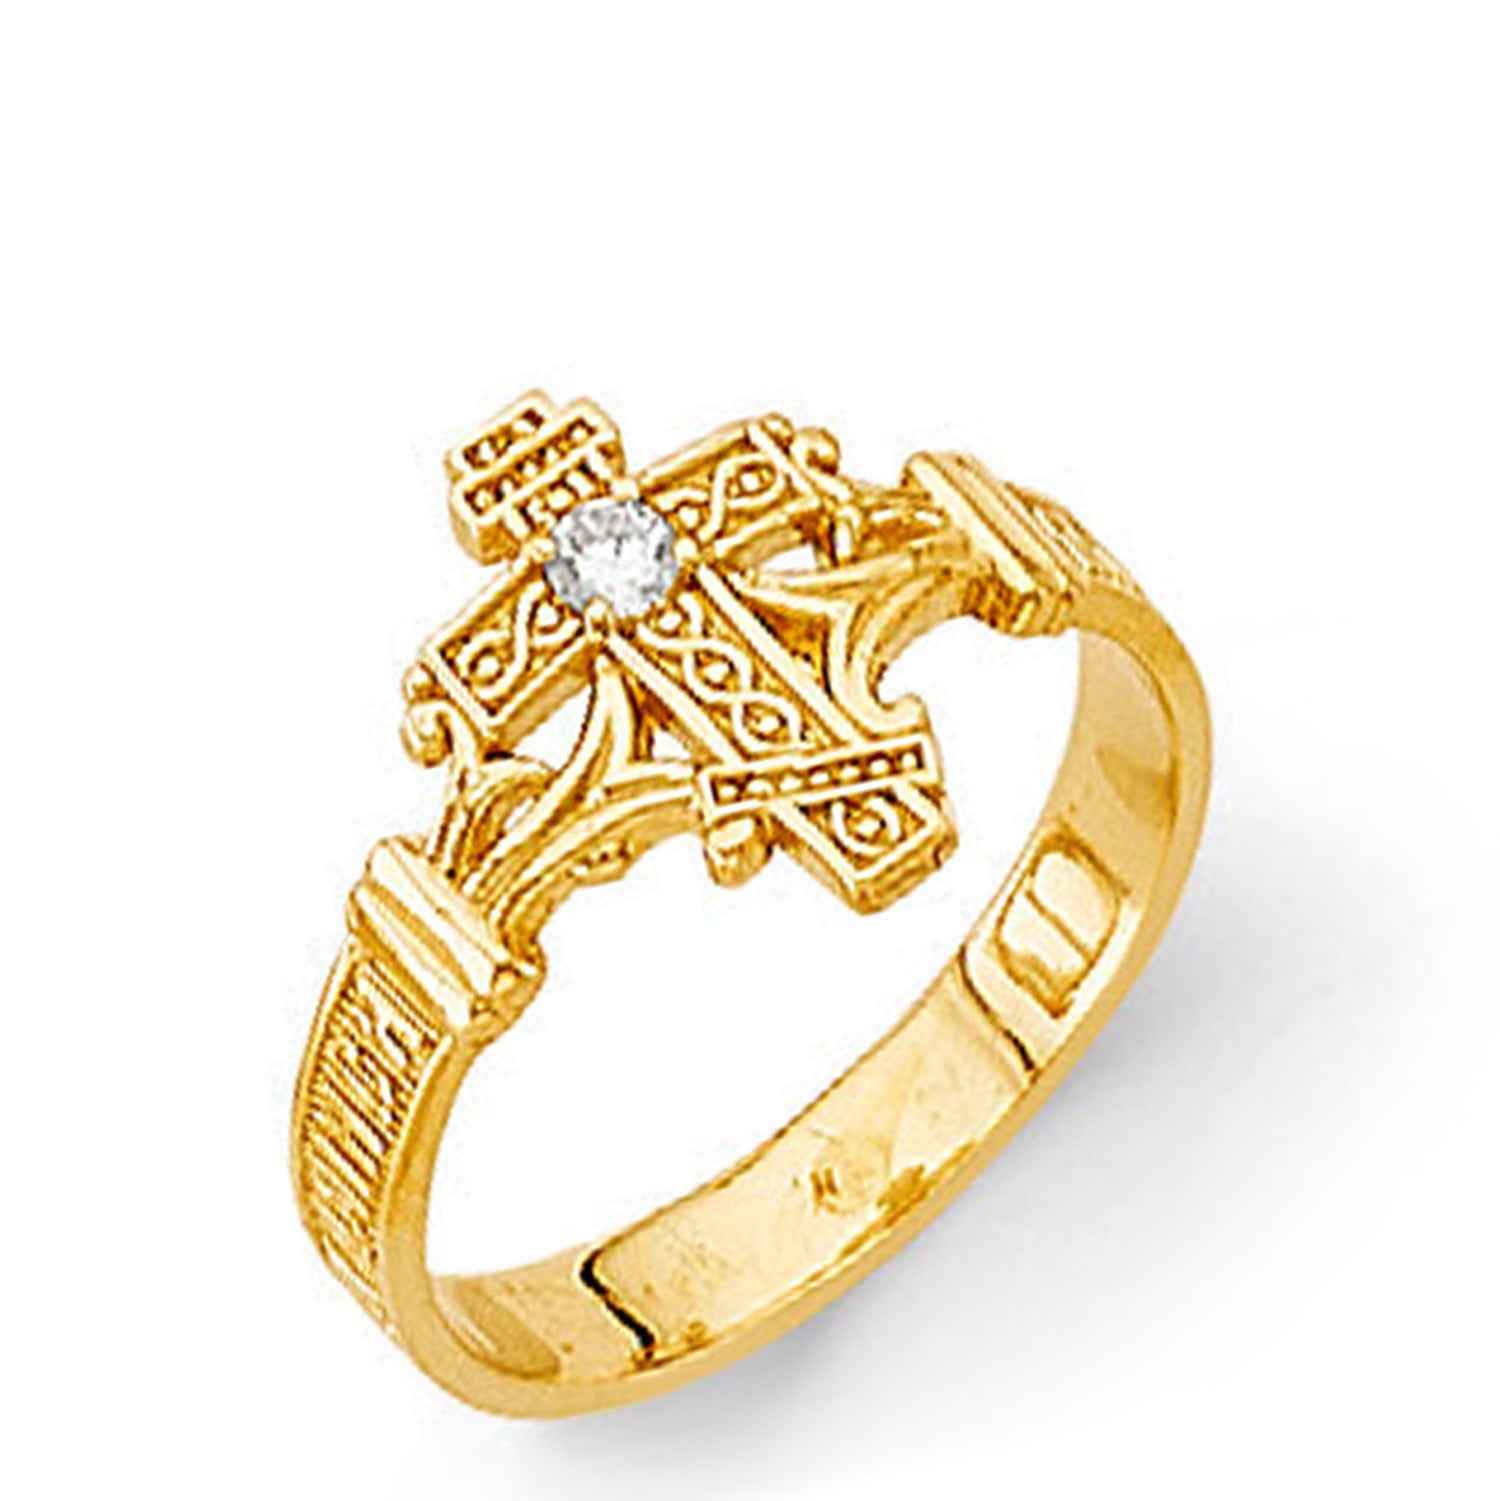 Textured Religious Cross Ring in Solid Gold 